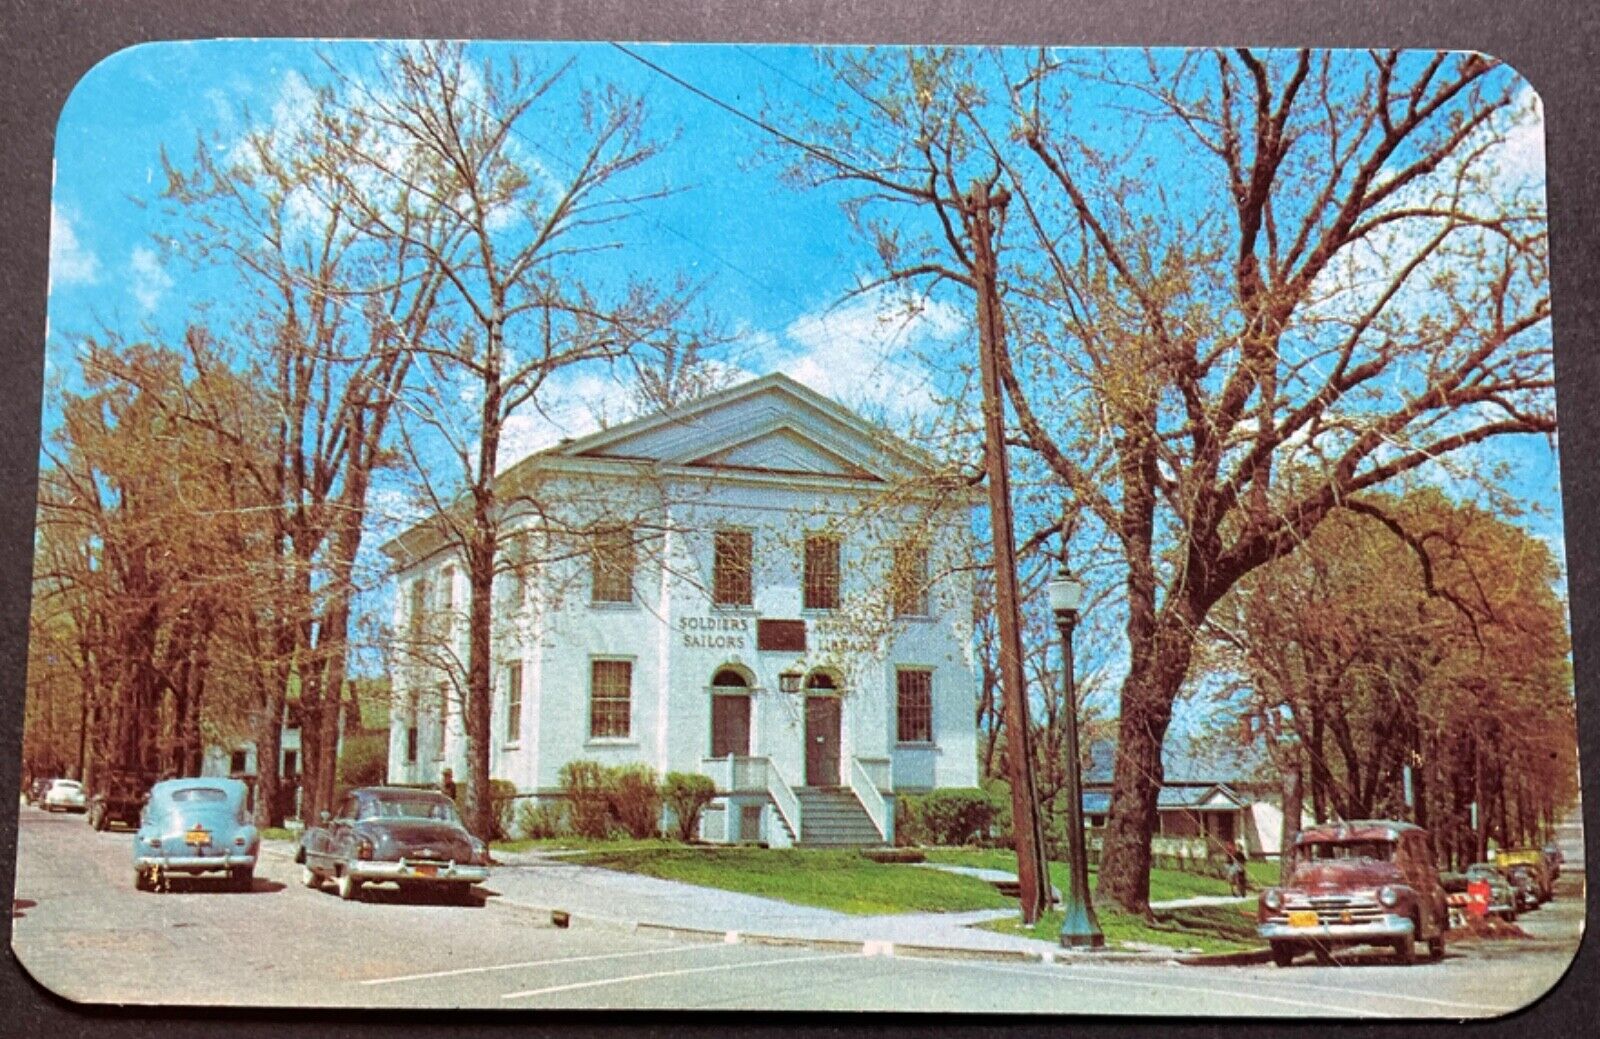 Geneva New York NY Postcard Soldier and Sailors Memorial Library Building